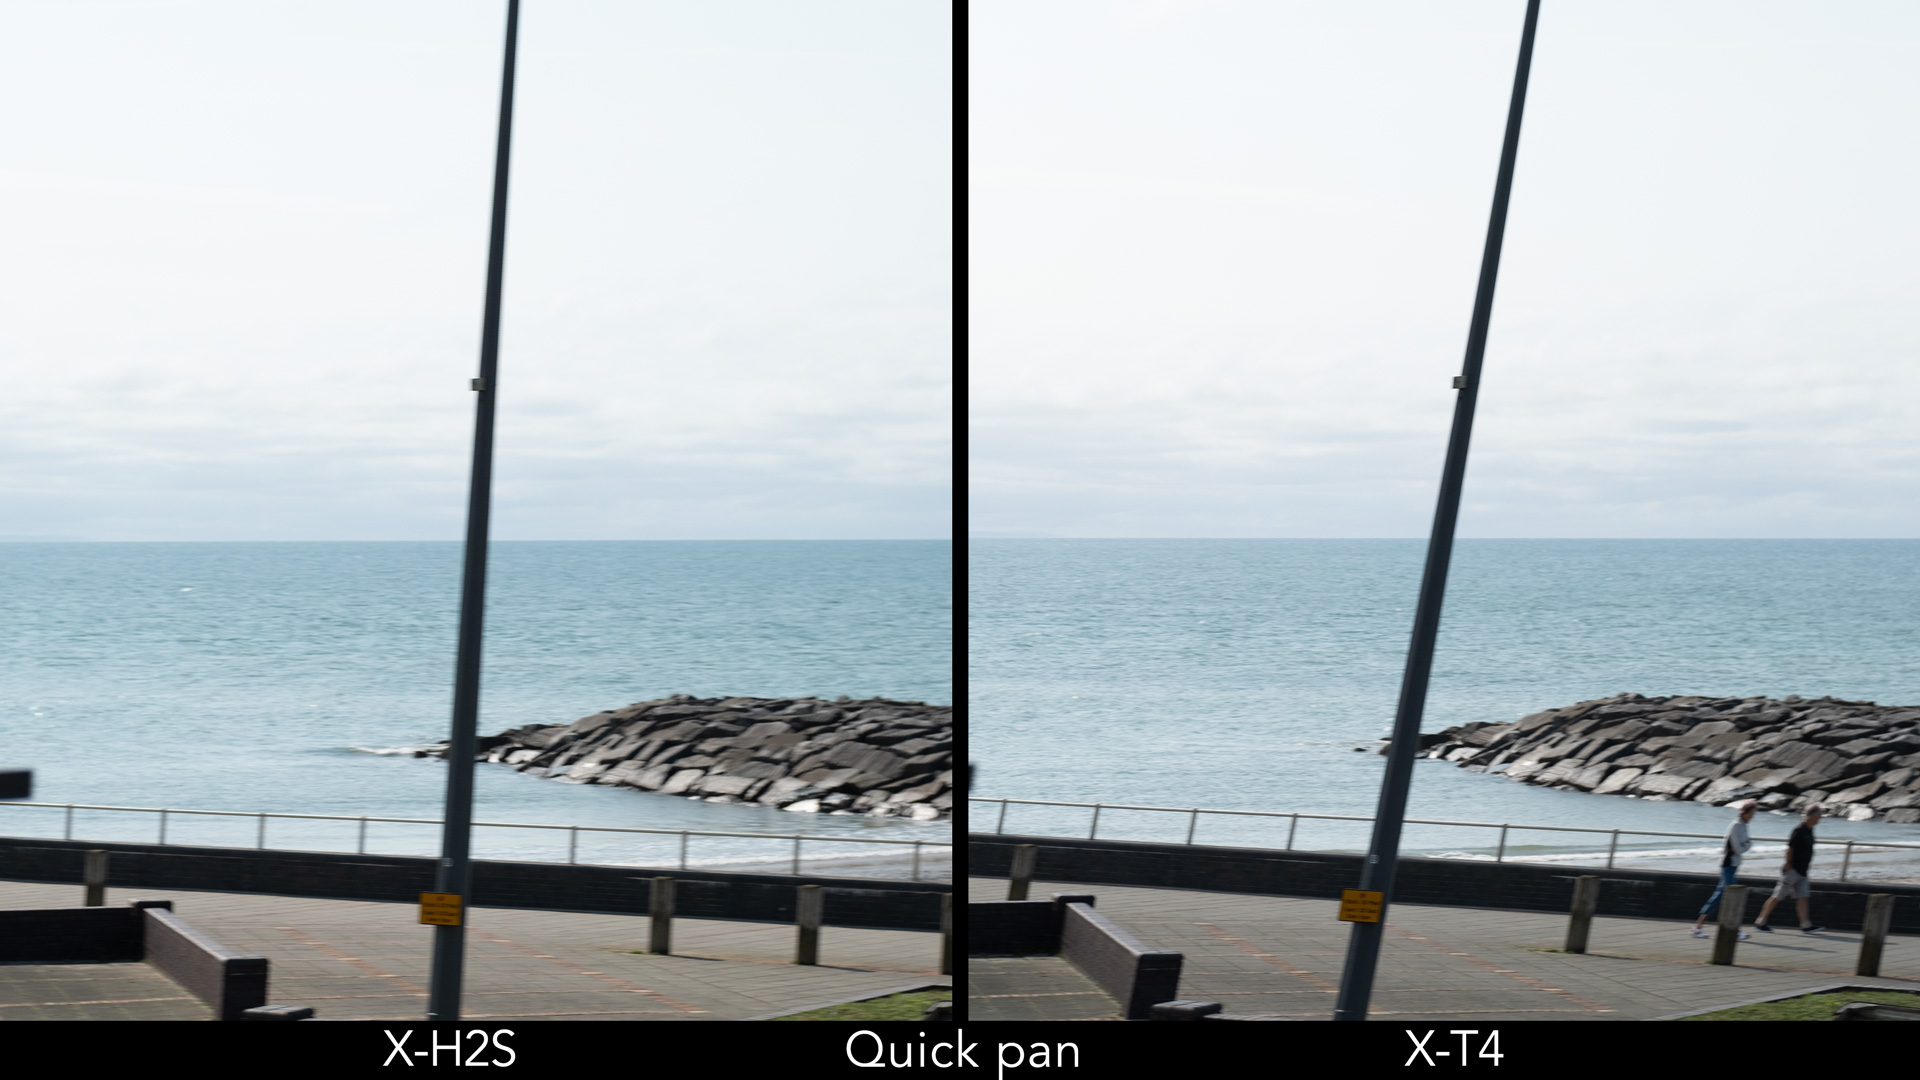 Side by side images showing distortion when panning quickly with the X-H2S and X-T4.